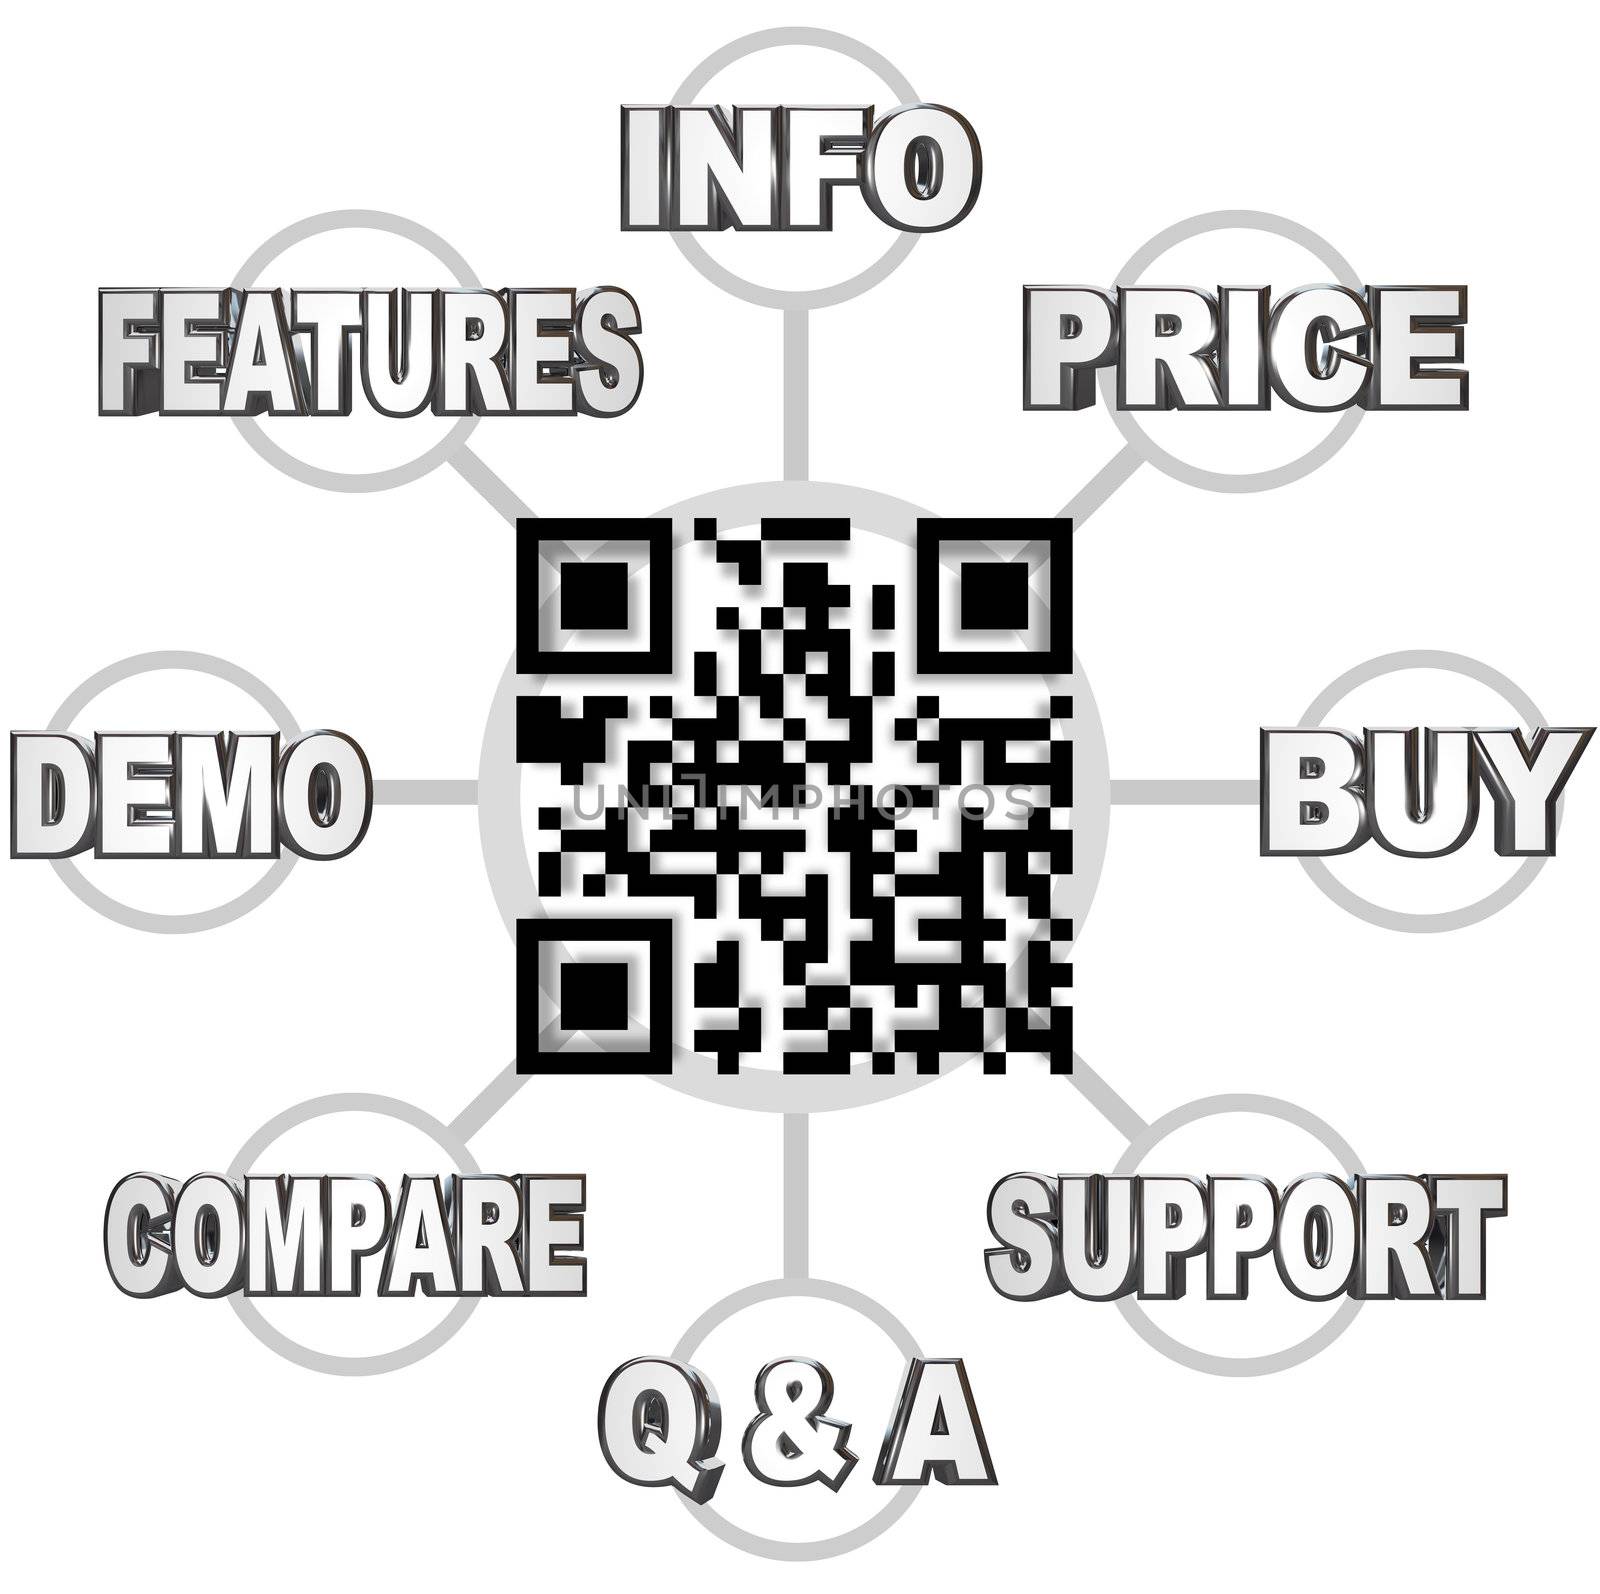 A grid illustrating the types of information you can learn by scanning the QR code on a product you see in a store